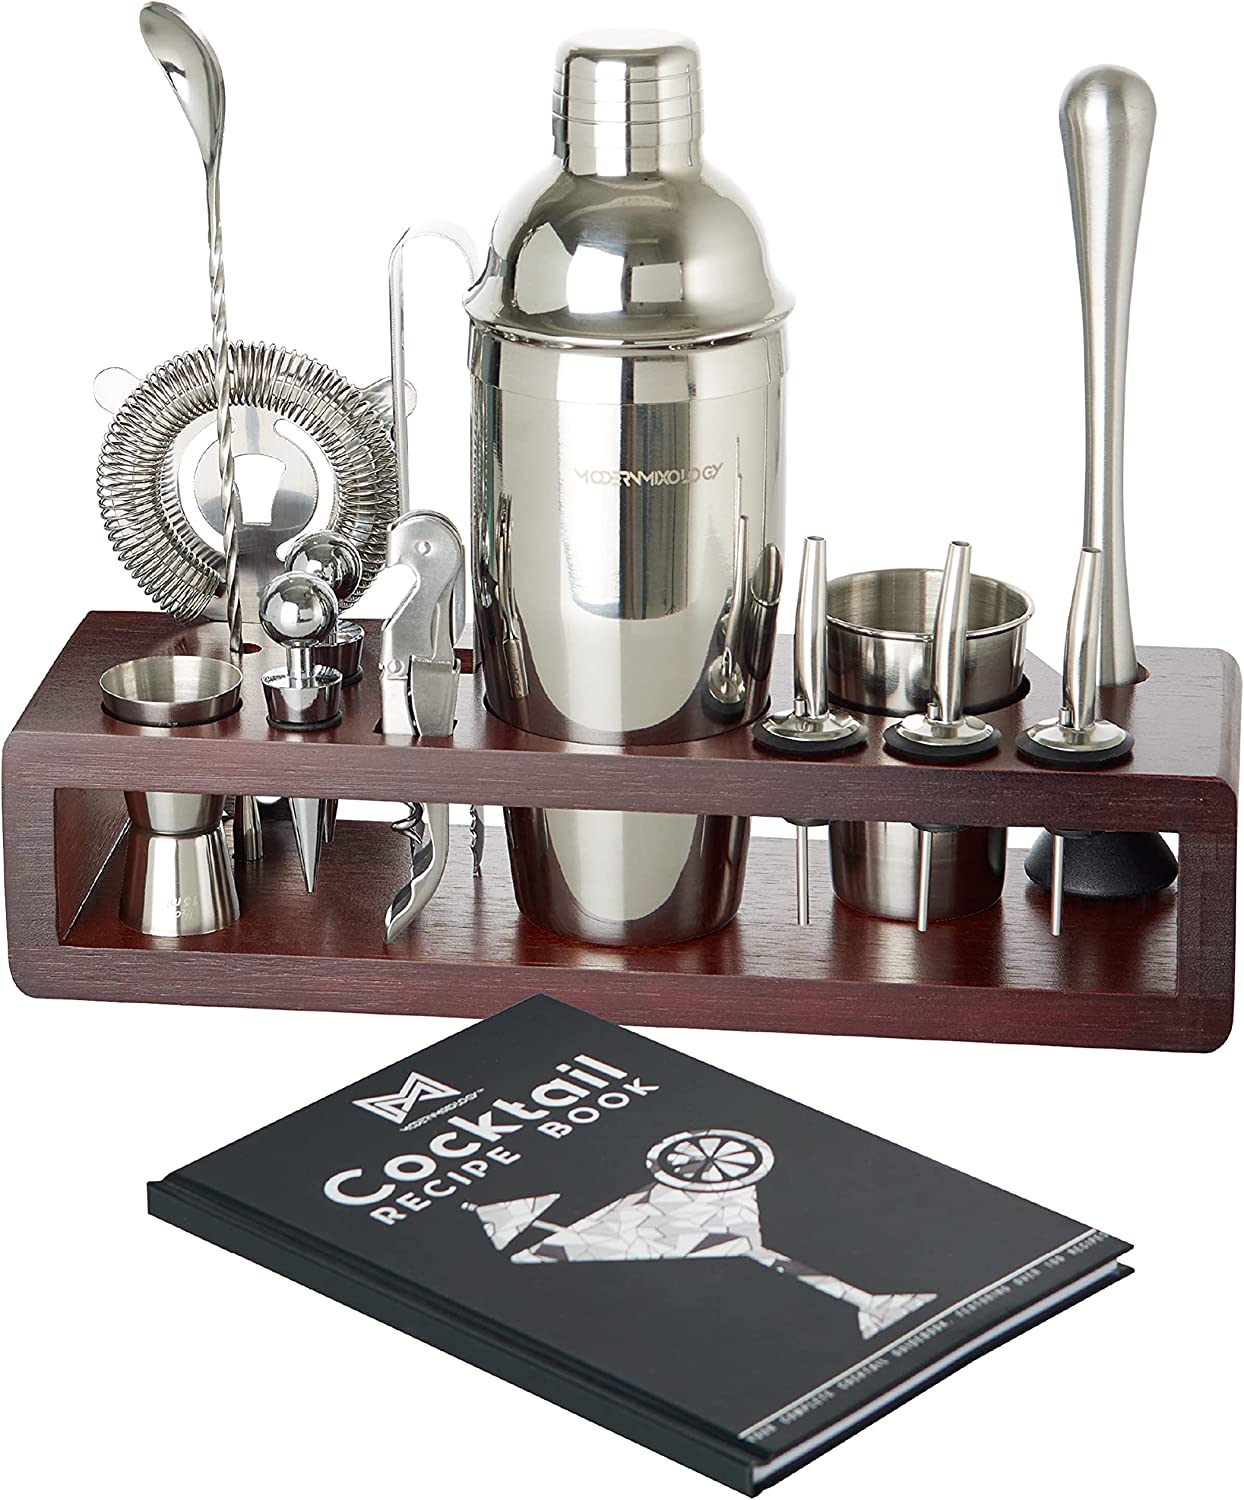 Modern Mixology Cocktail Shaker Set - 24 piece Stainless Steel Bartender Drink Kit & Stand for Home Bar, Perfect for Drink Mixing at Home, Plus Cocktail Recipe - Walmart.com